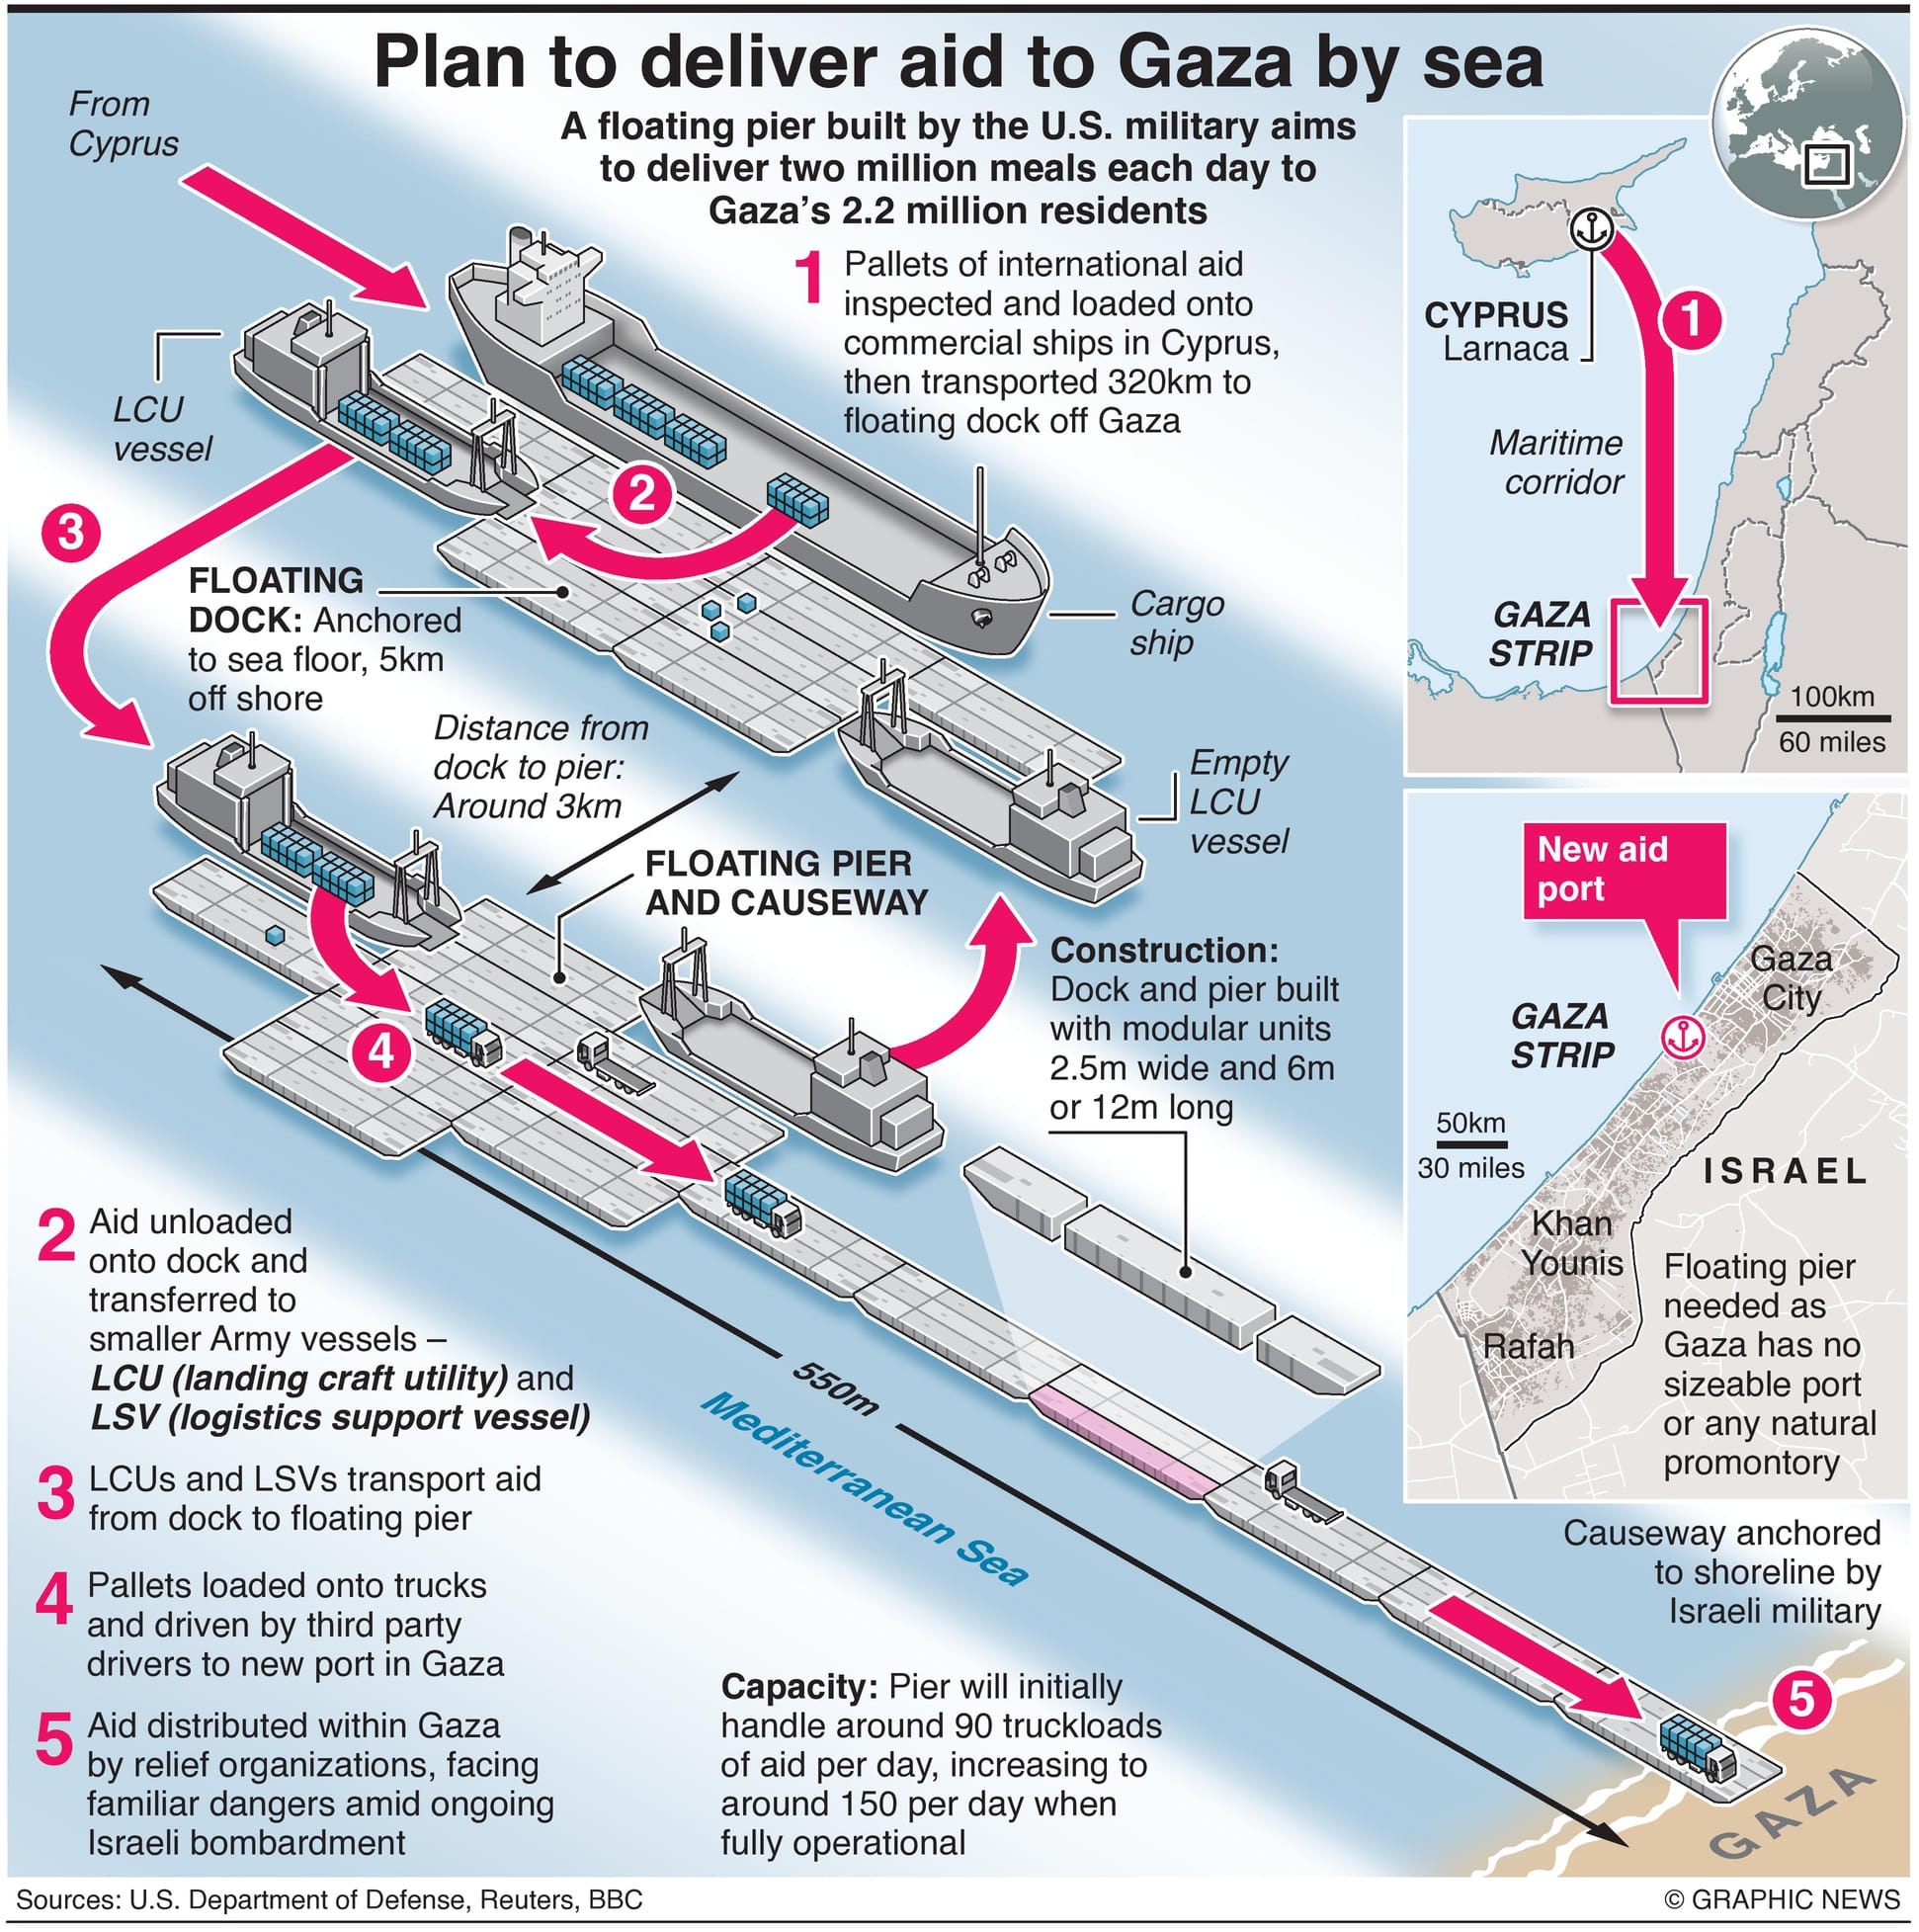 U.S. Plan To Deliver Aid To Gaza By Sea - Infographic